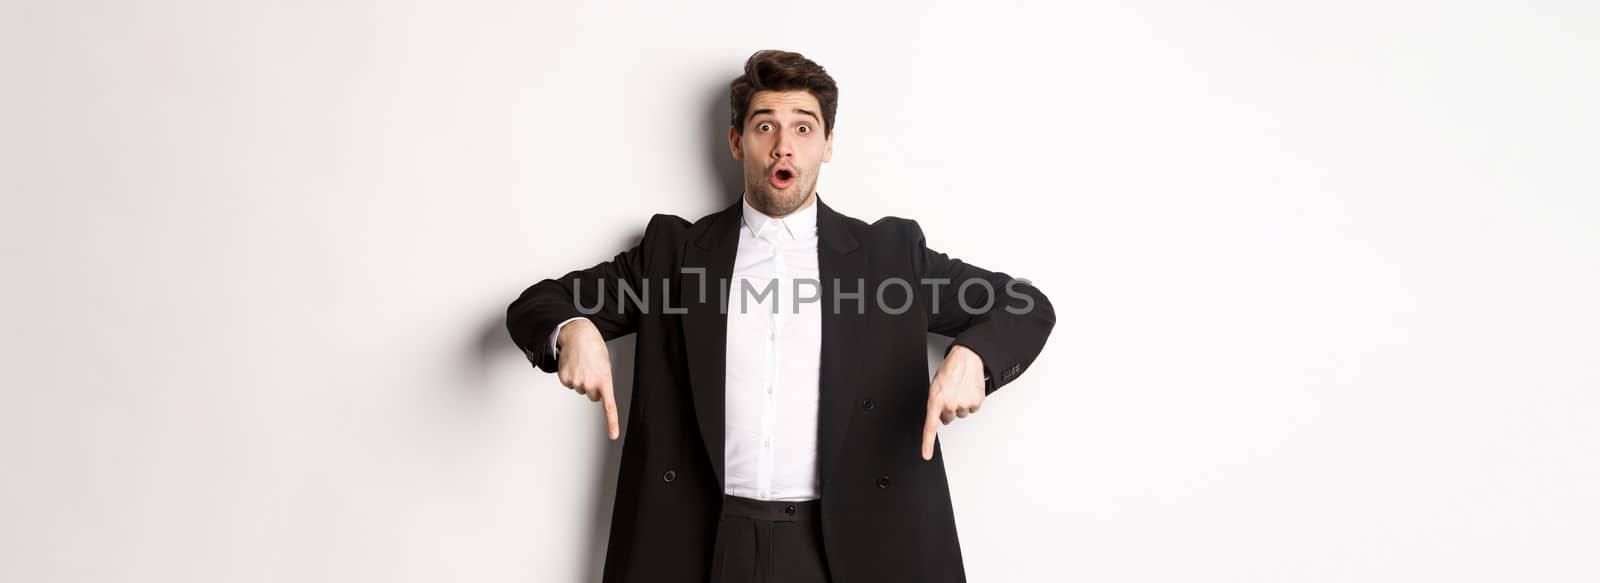 Portrait of surprised and excited man in black suit, pointing fingers down and showing christmas advertisement, standing over white background.